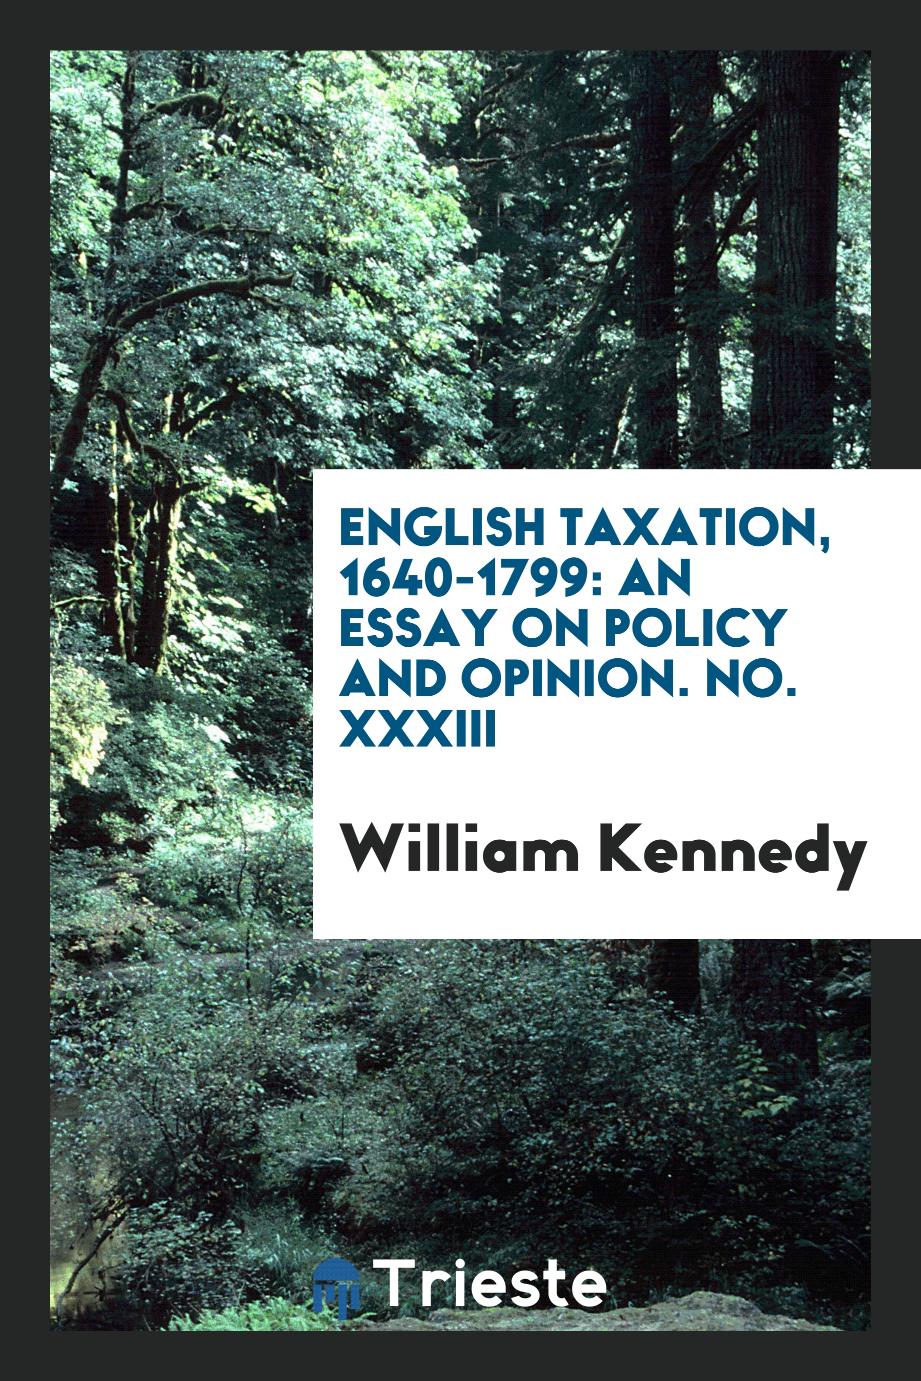 English taxation, 1640-1799: an essay on policy and opinion. No. XXXIII